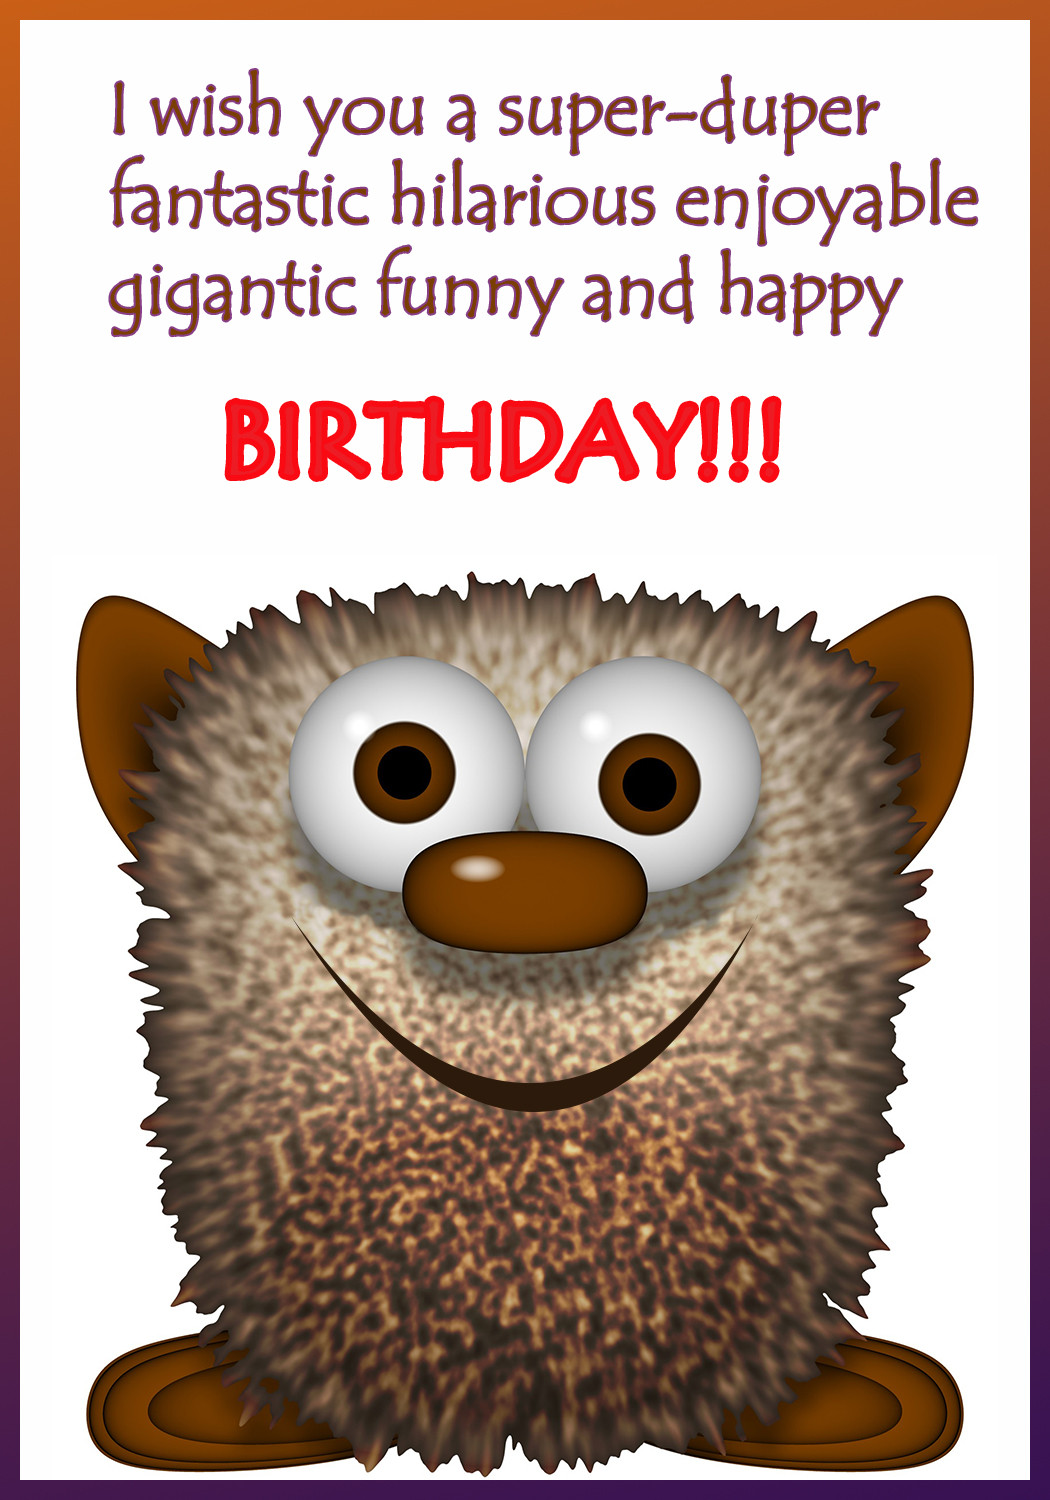 Funny Birthday Card Pictures
 Funny Printable Birthday Cards